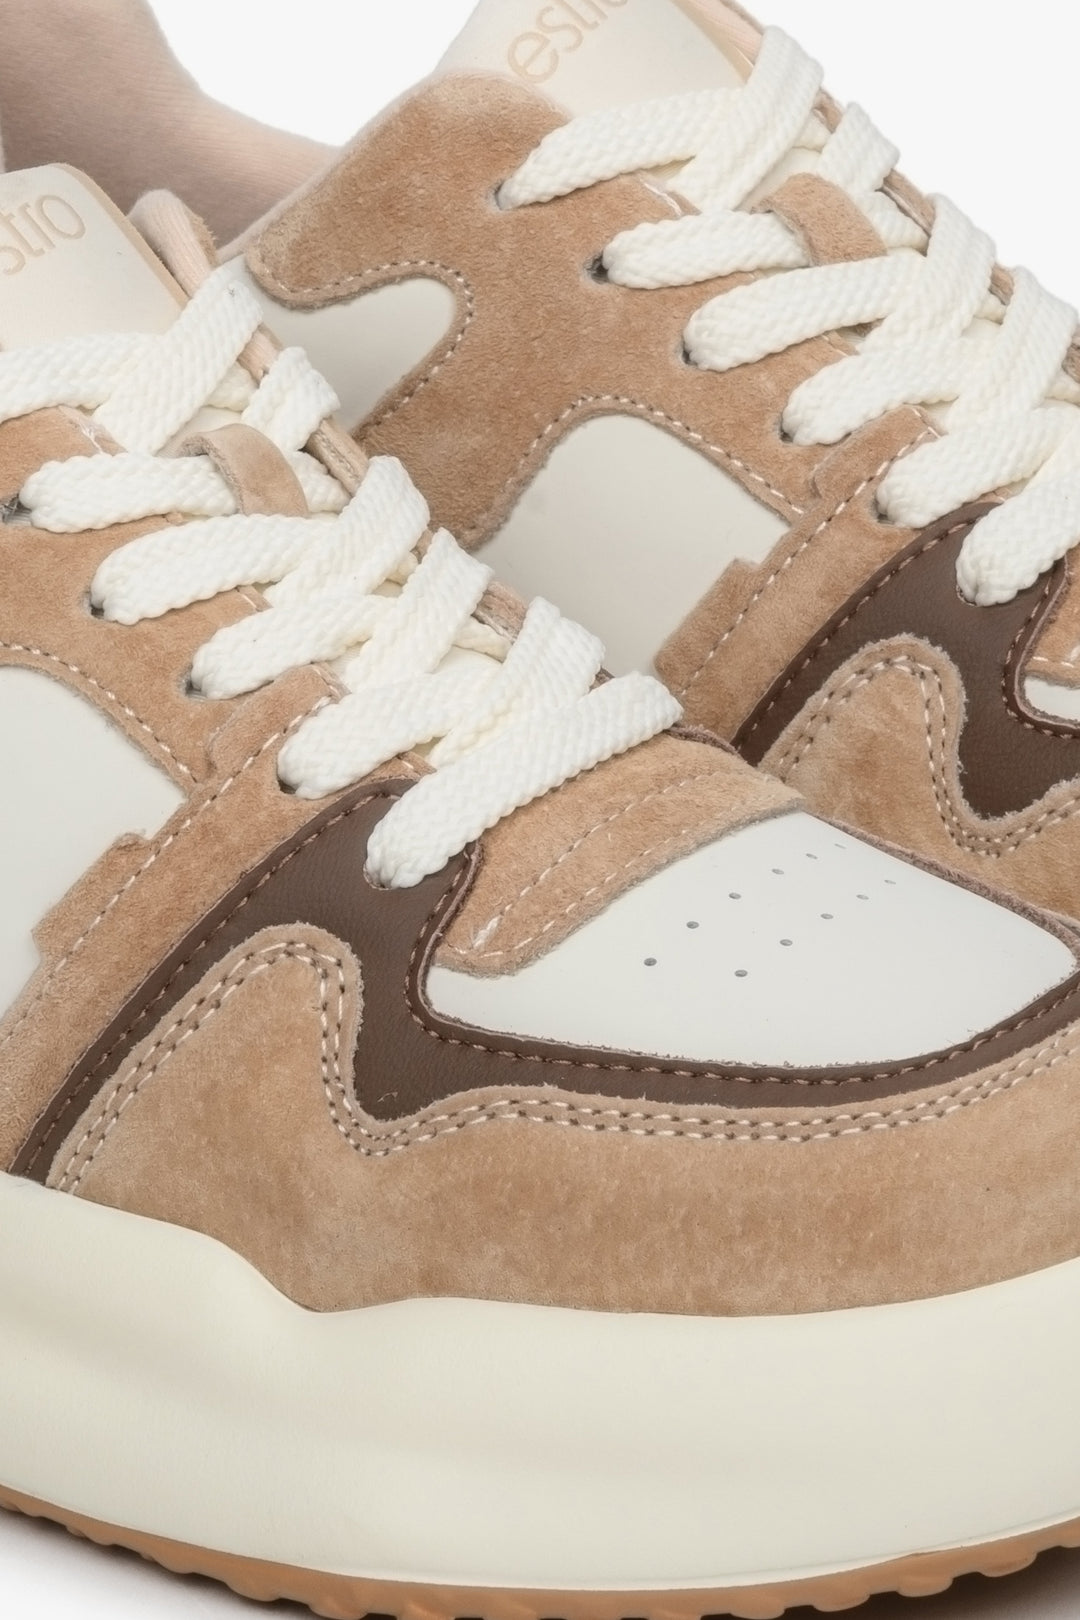 Women's beige and white sneakers - close-up on details.